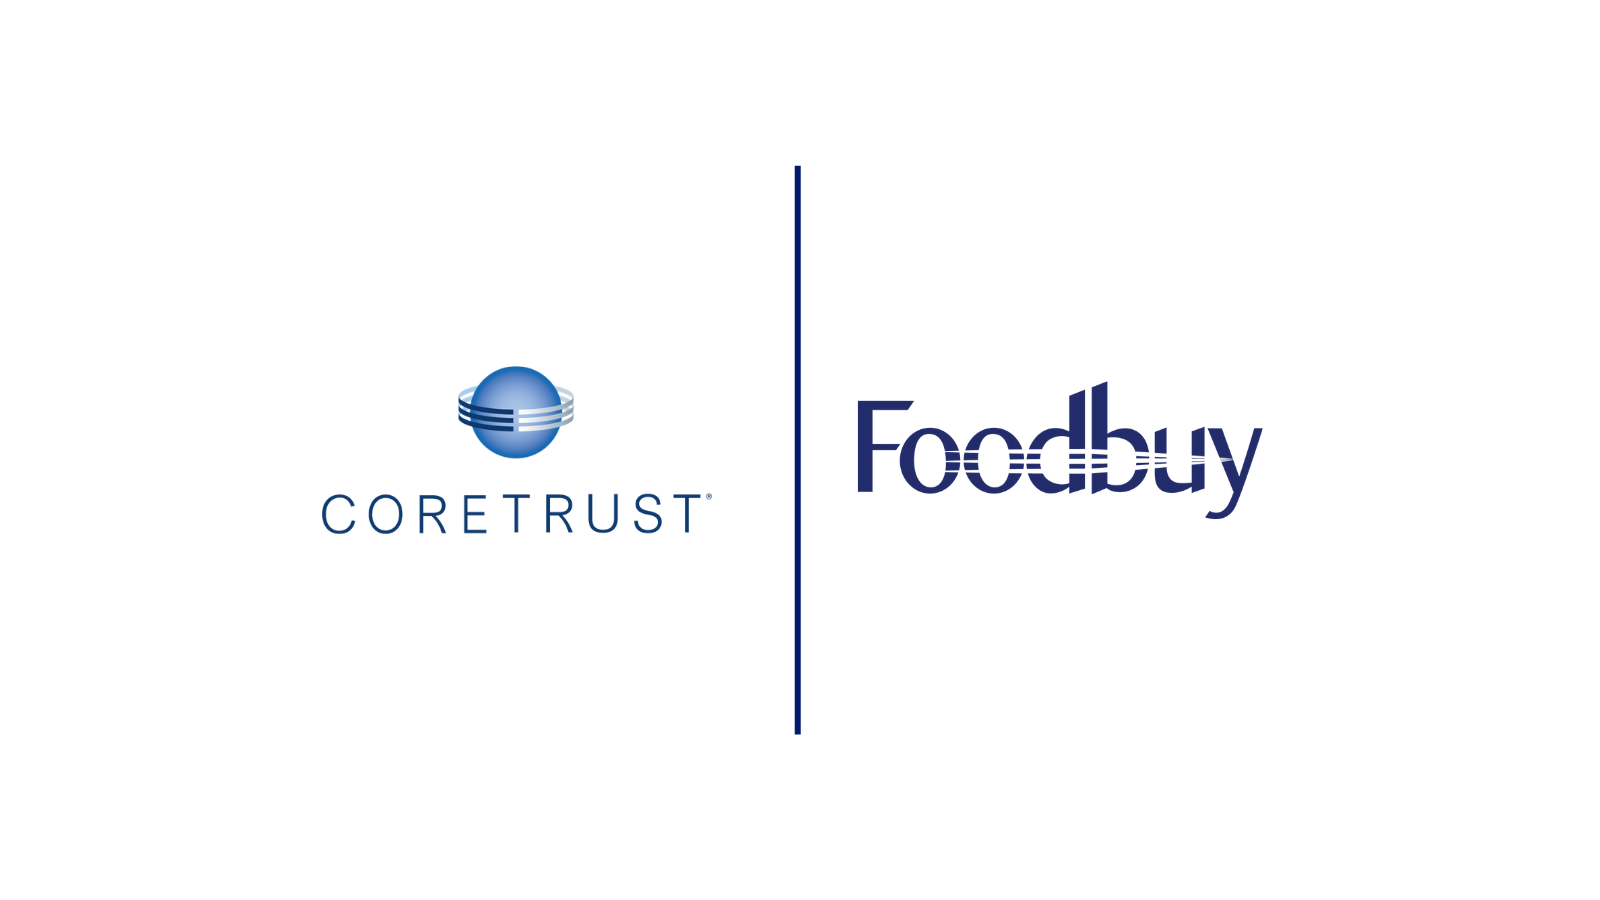 Foodbuy Joins Forces with CoreTrust